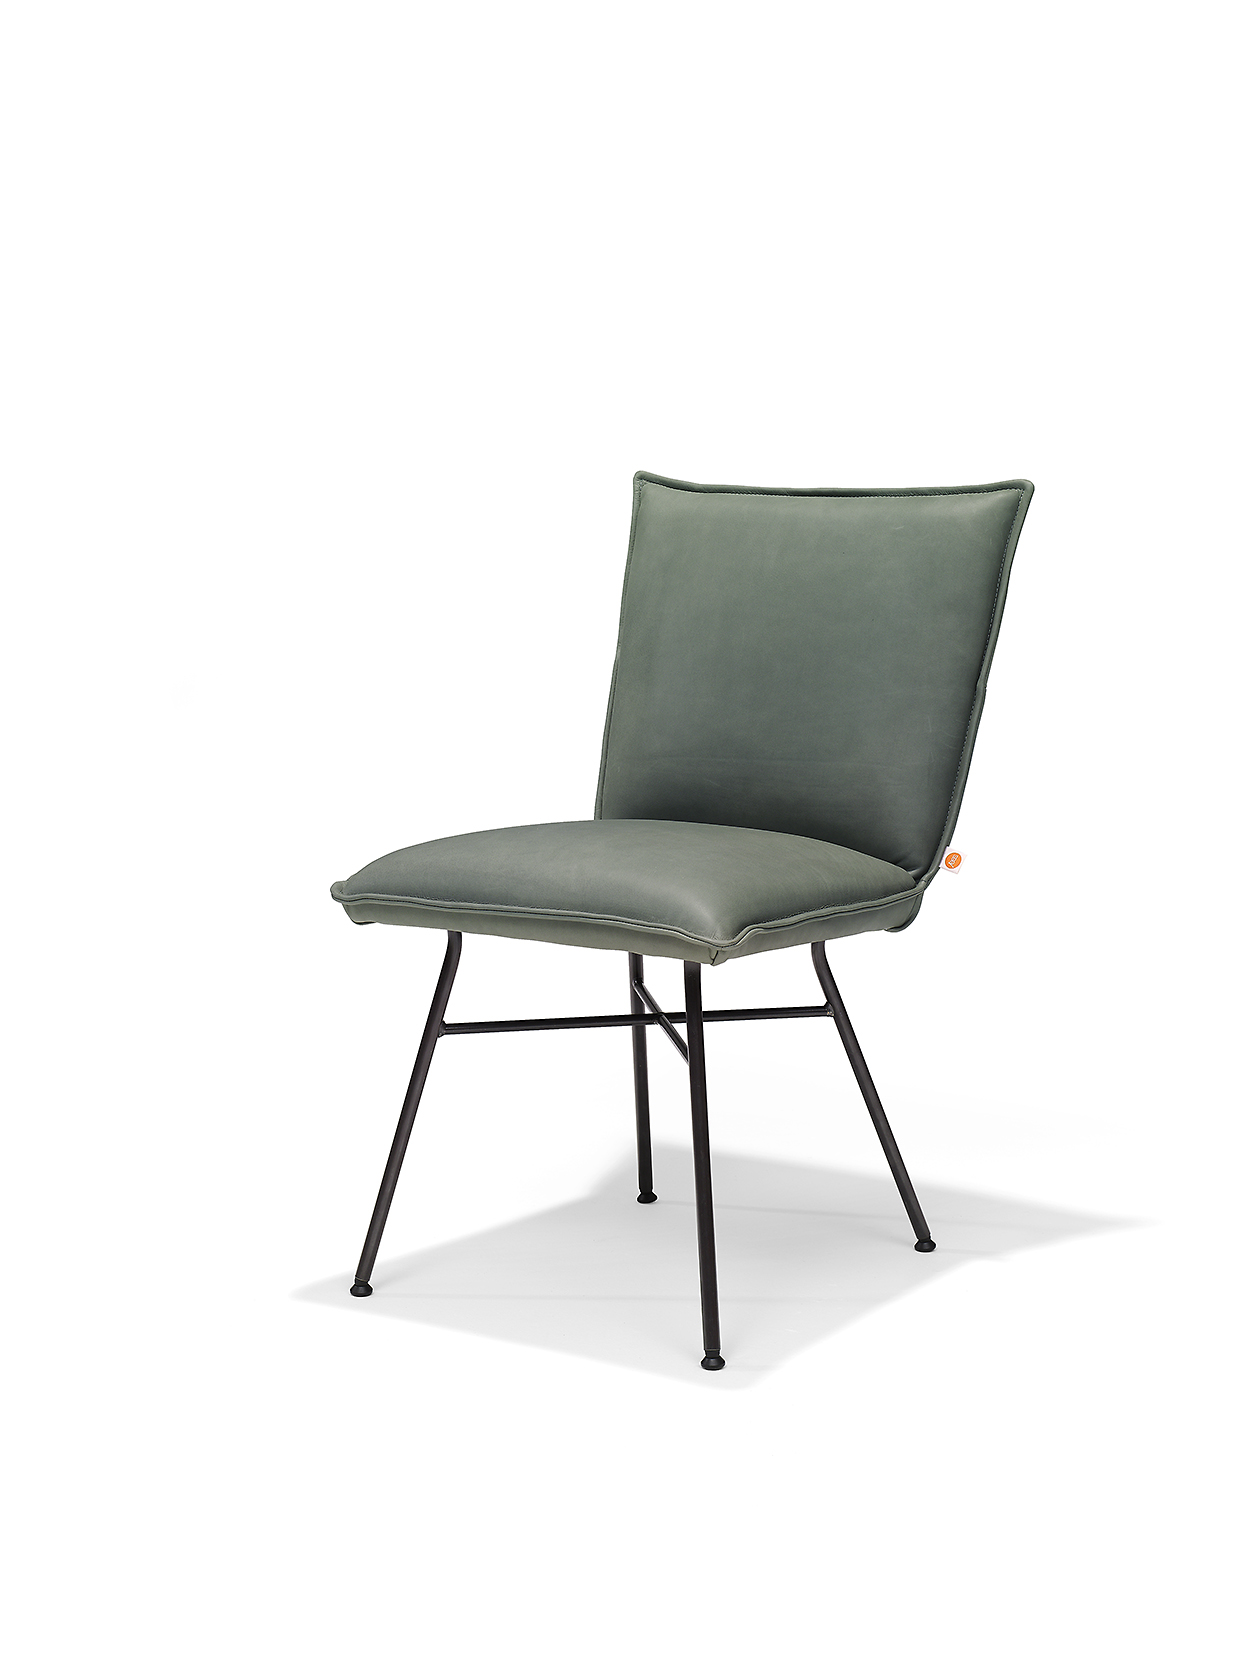 Sanne Chair Without Arm Sadie Olive Pers LR